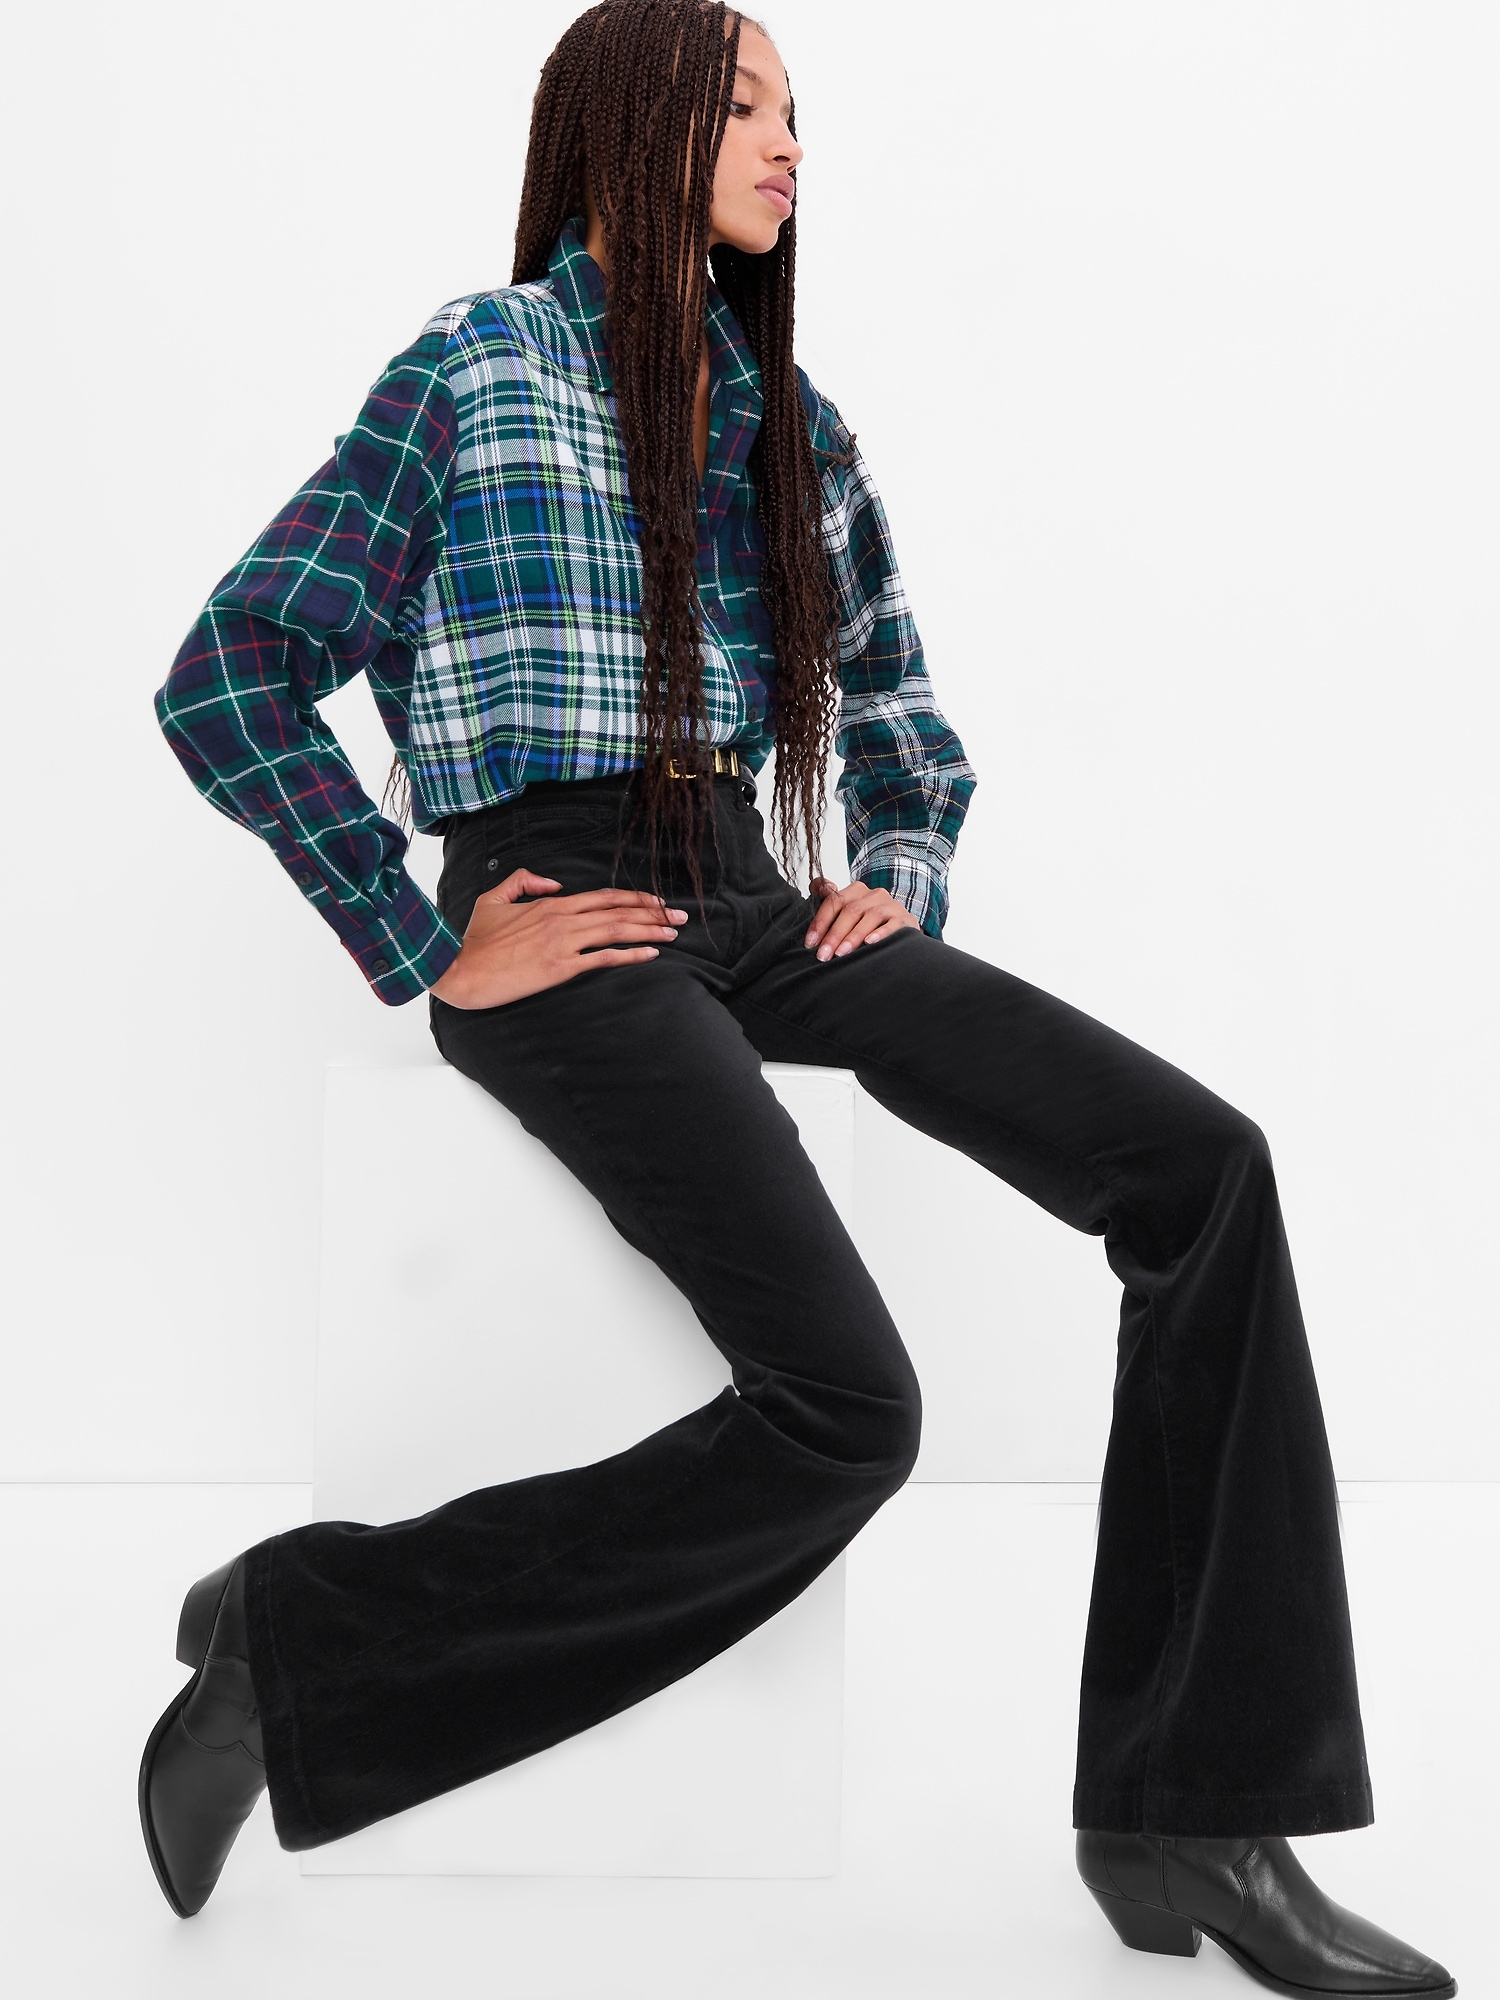 70s Jeans for Women - Up to 80% off